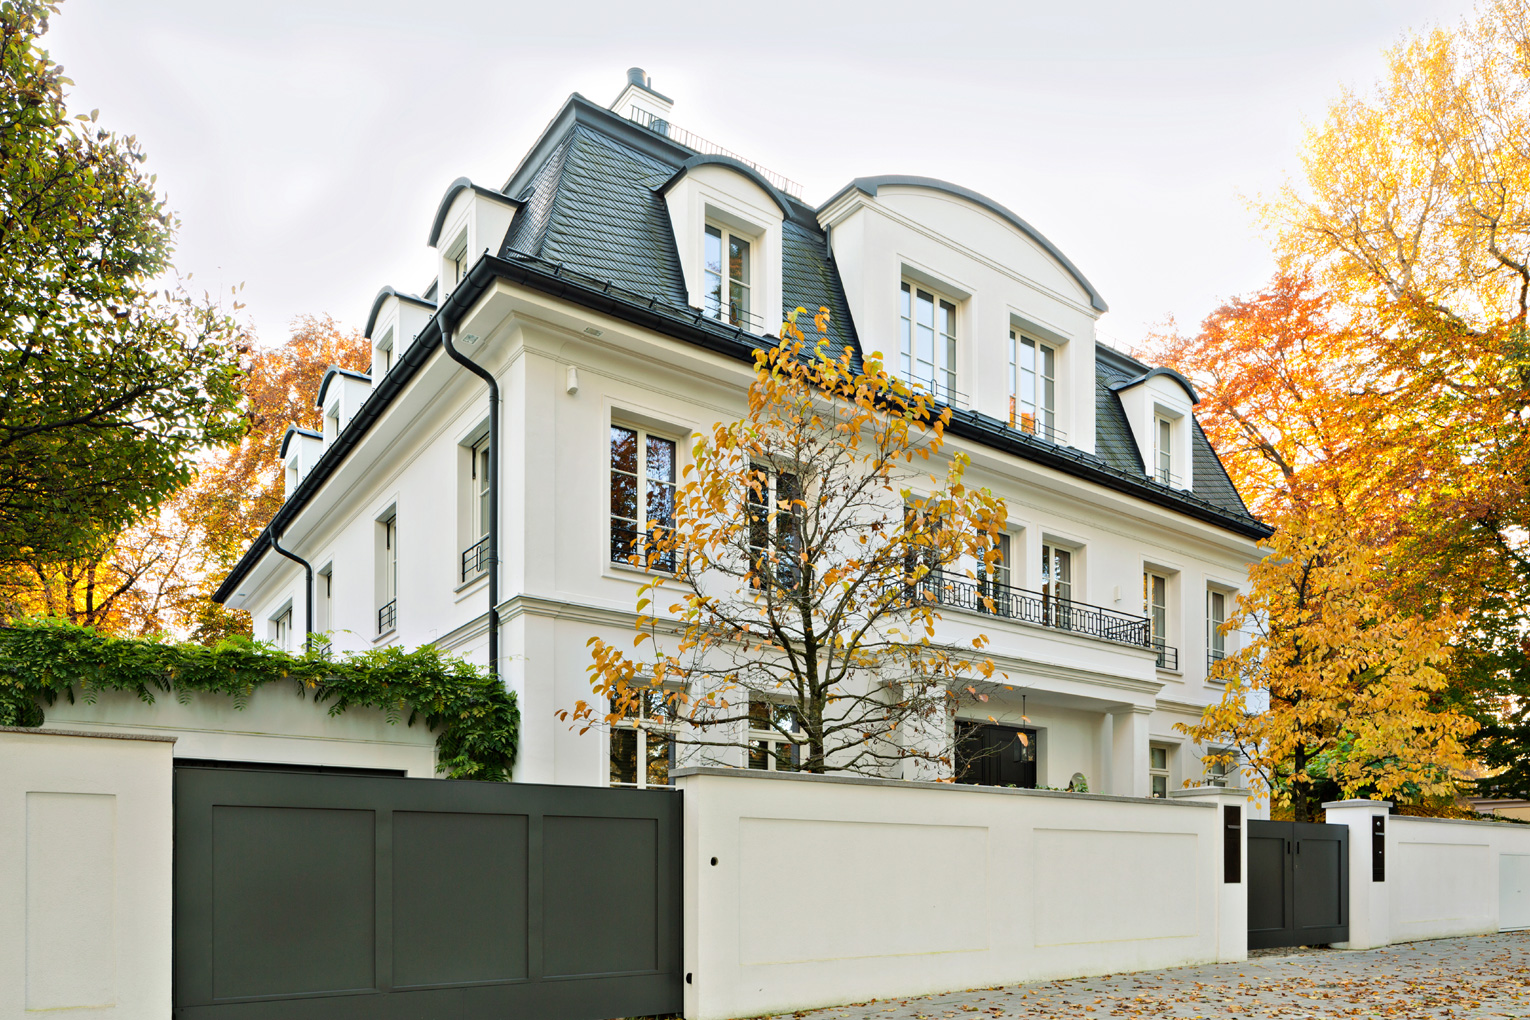 Buy and sell homes and villas in munich without the hassle. 